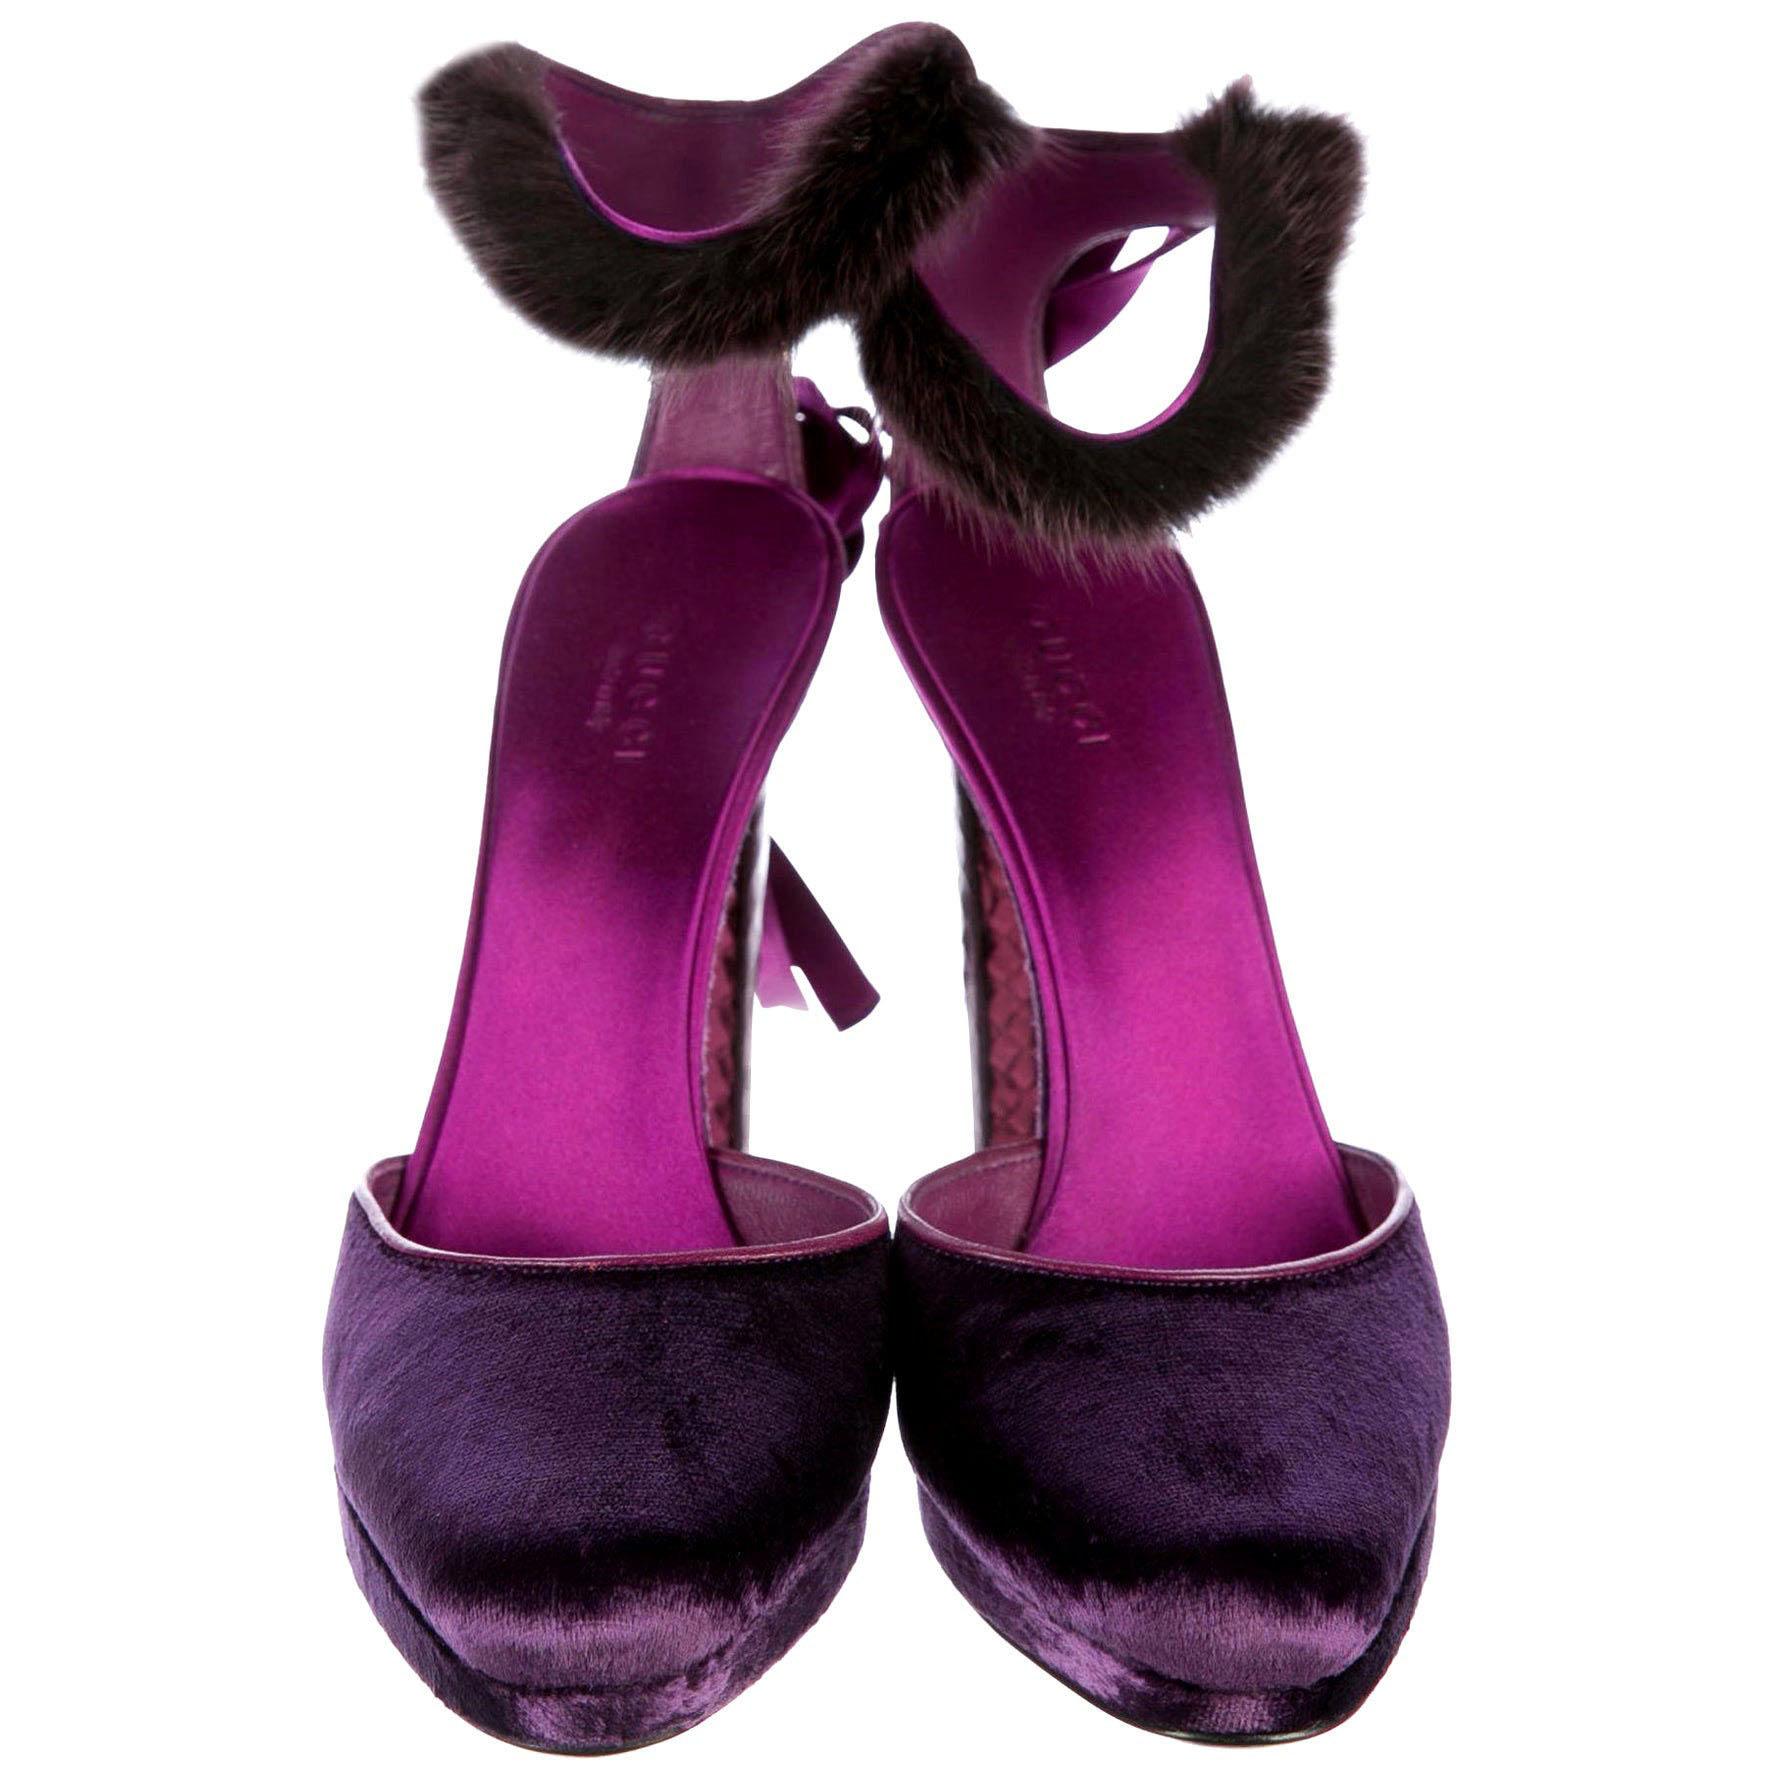 New Tom Ford For Gucci Farewell Collection Mink Python Velvet Heels Sz 7.5